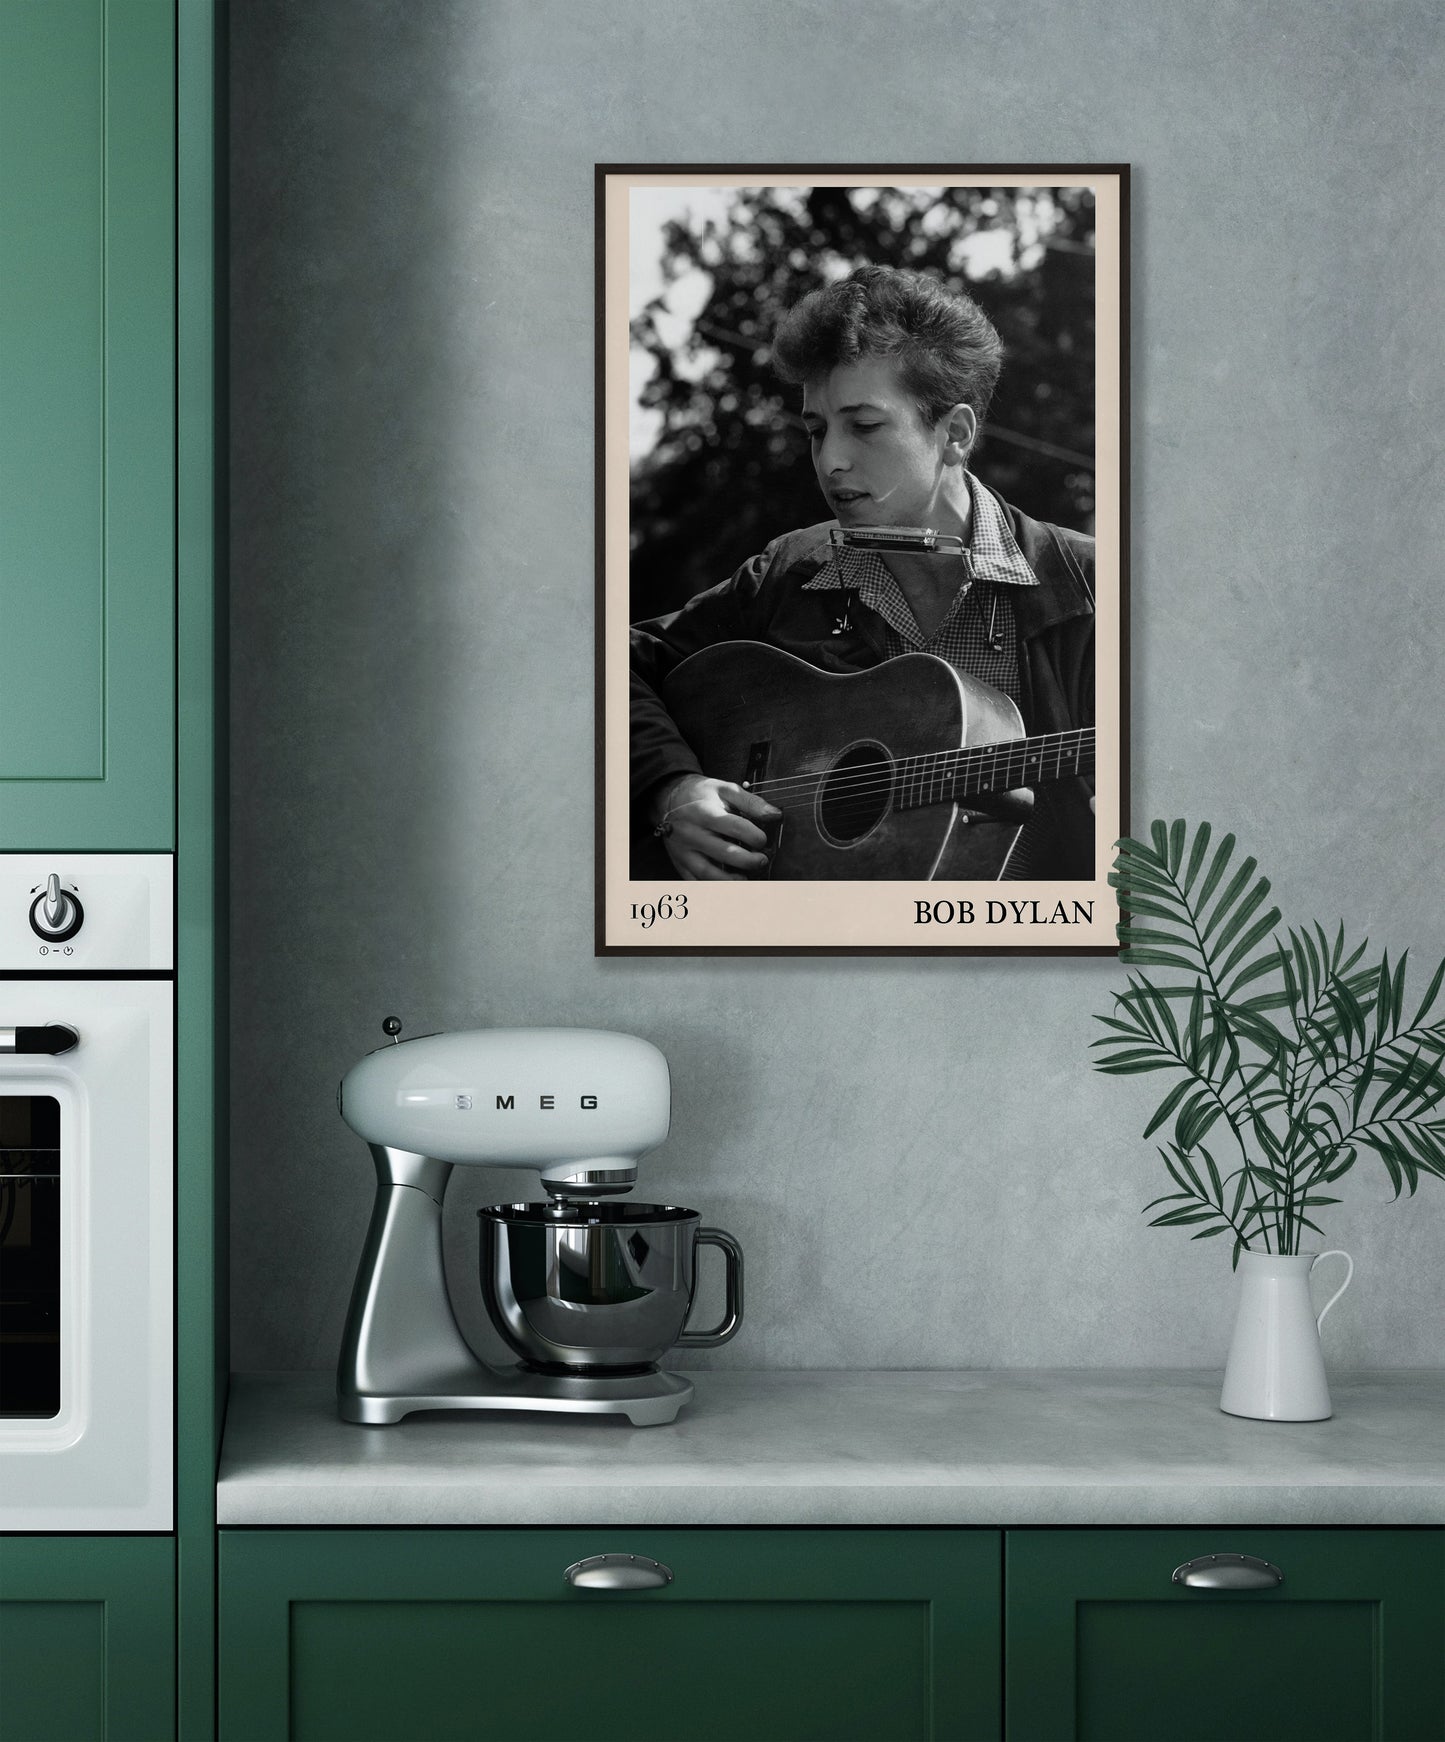 1963 photograph of Bob Dylan playing blues guitar.Crafted into cool framed blues poster.